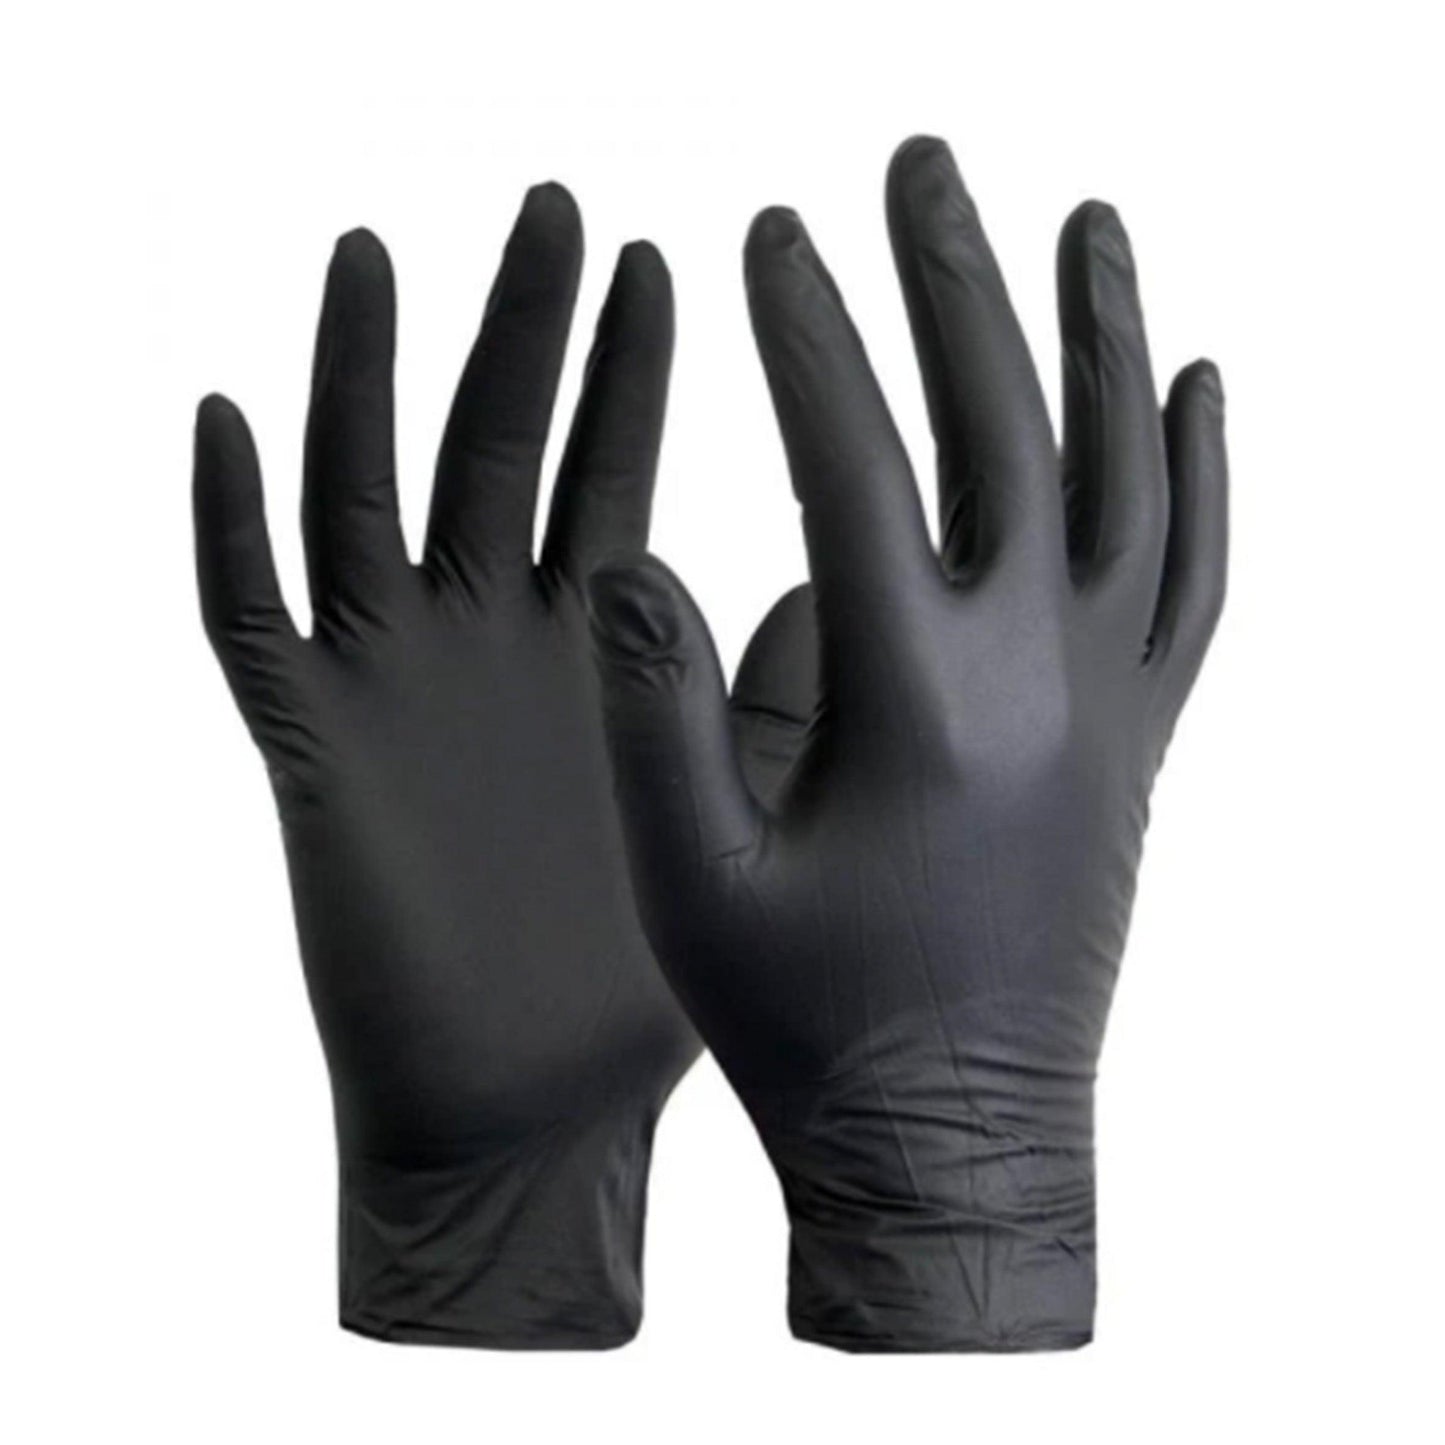 DTS Black Powder Free Nitrile Gloves 4.2G - Offer (DO NOT ADD CODES). - Tattoo Everything Supplies